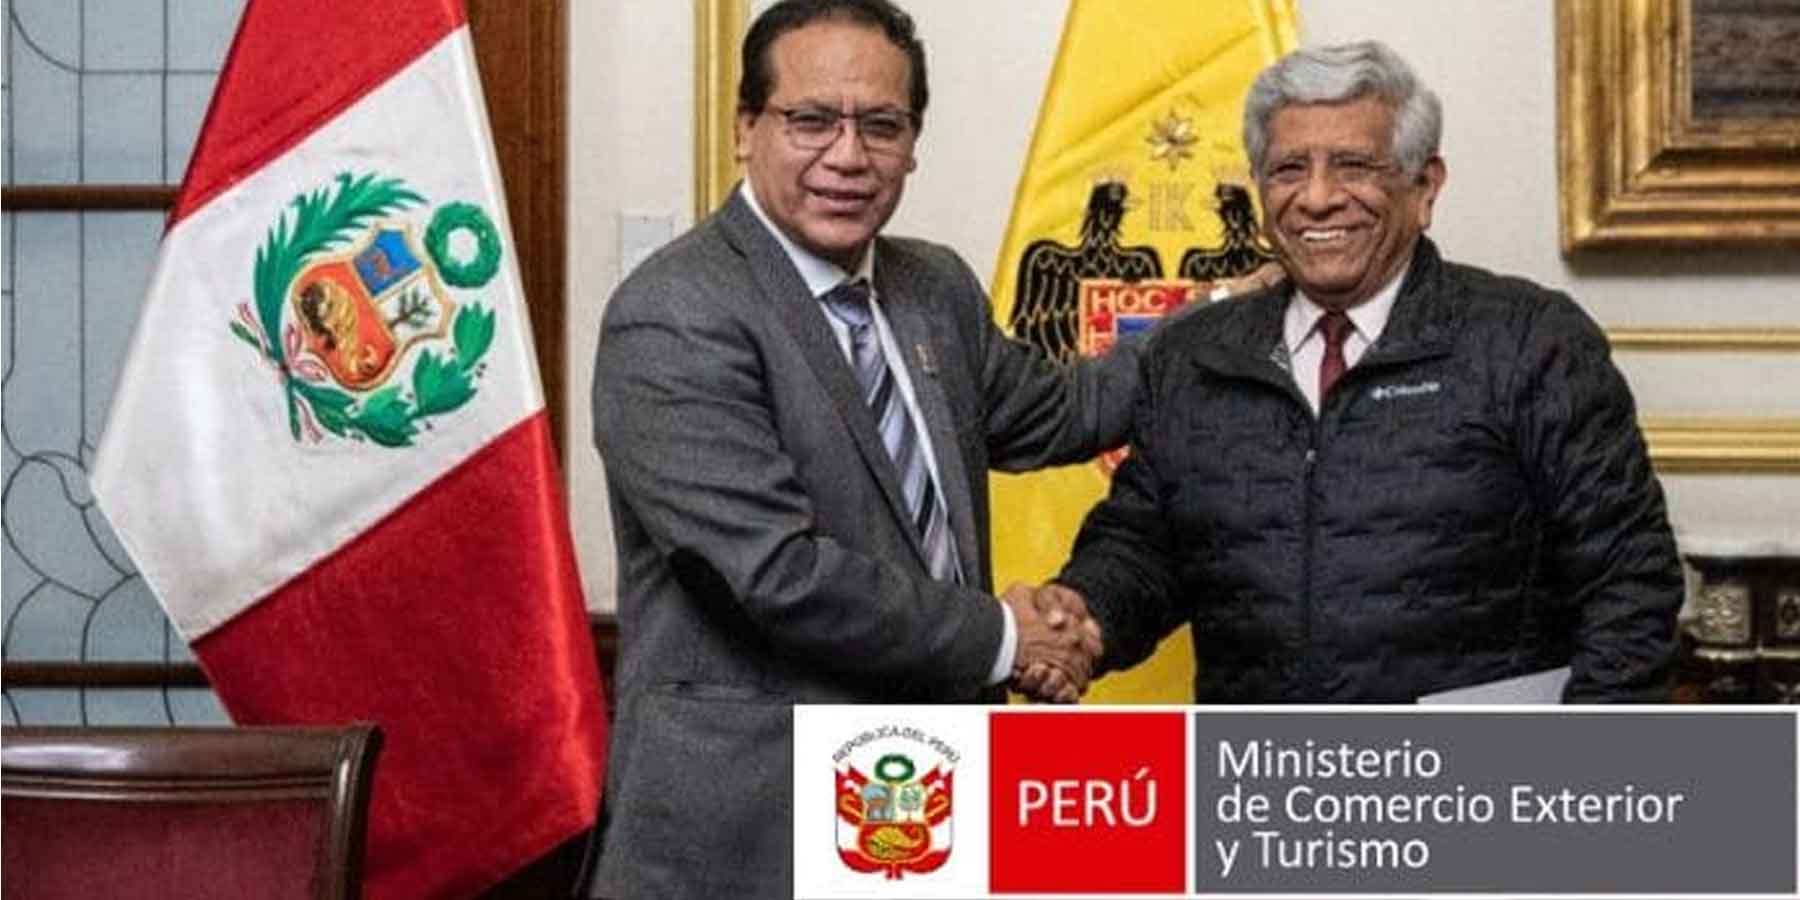 peruvian-congress-is-currently-examining-amendments-to-the-legislation-governing-online-gambling-and-sports-betting-gamingo-news